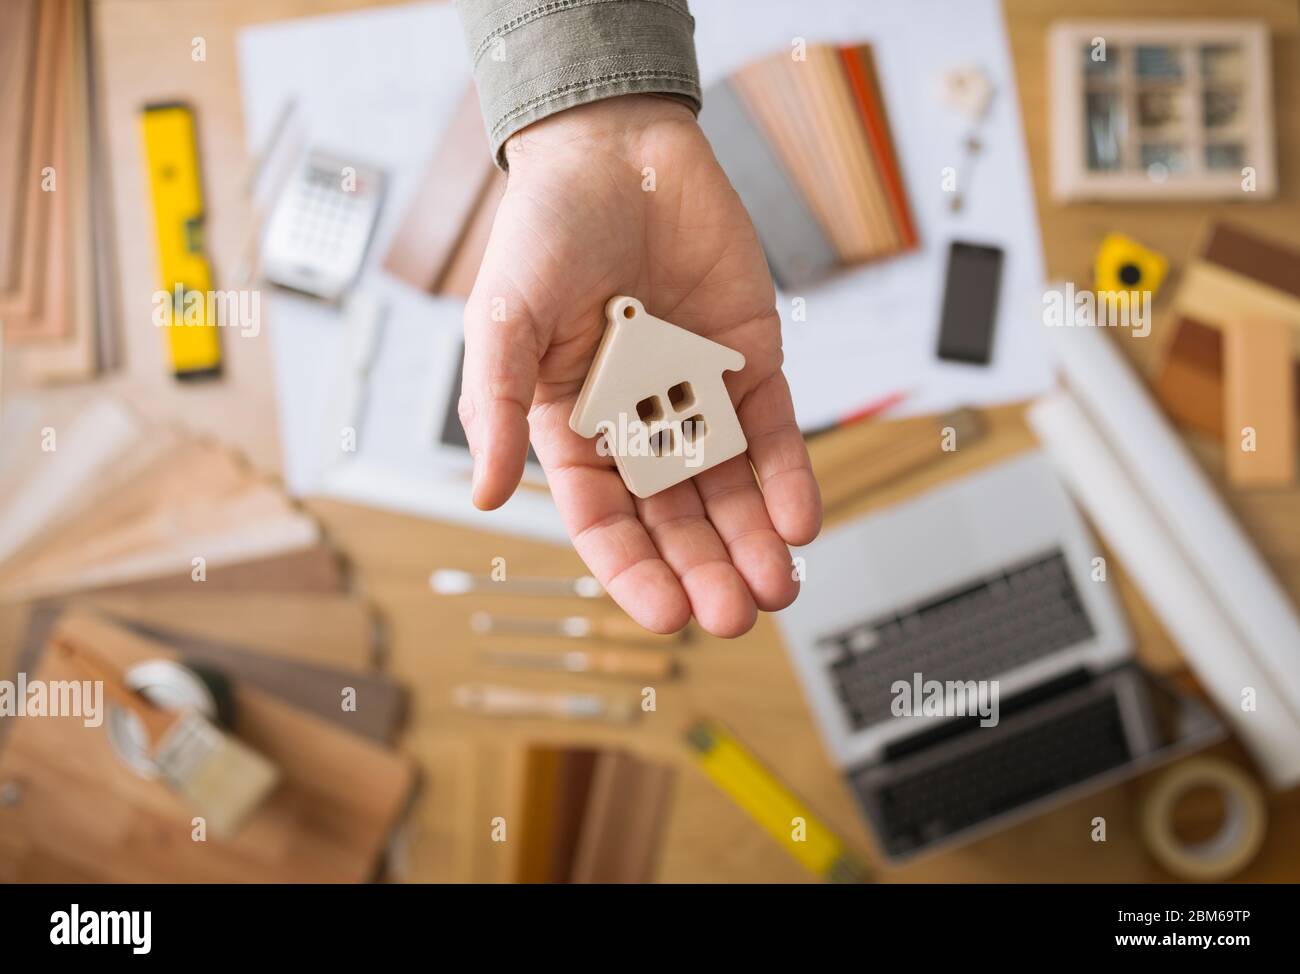 Real estate agent holding a small house, desktop with tools, wood swatches and computer on background, top view Stock Photo